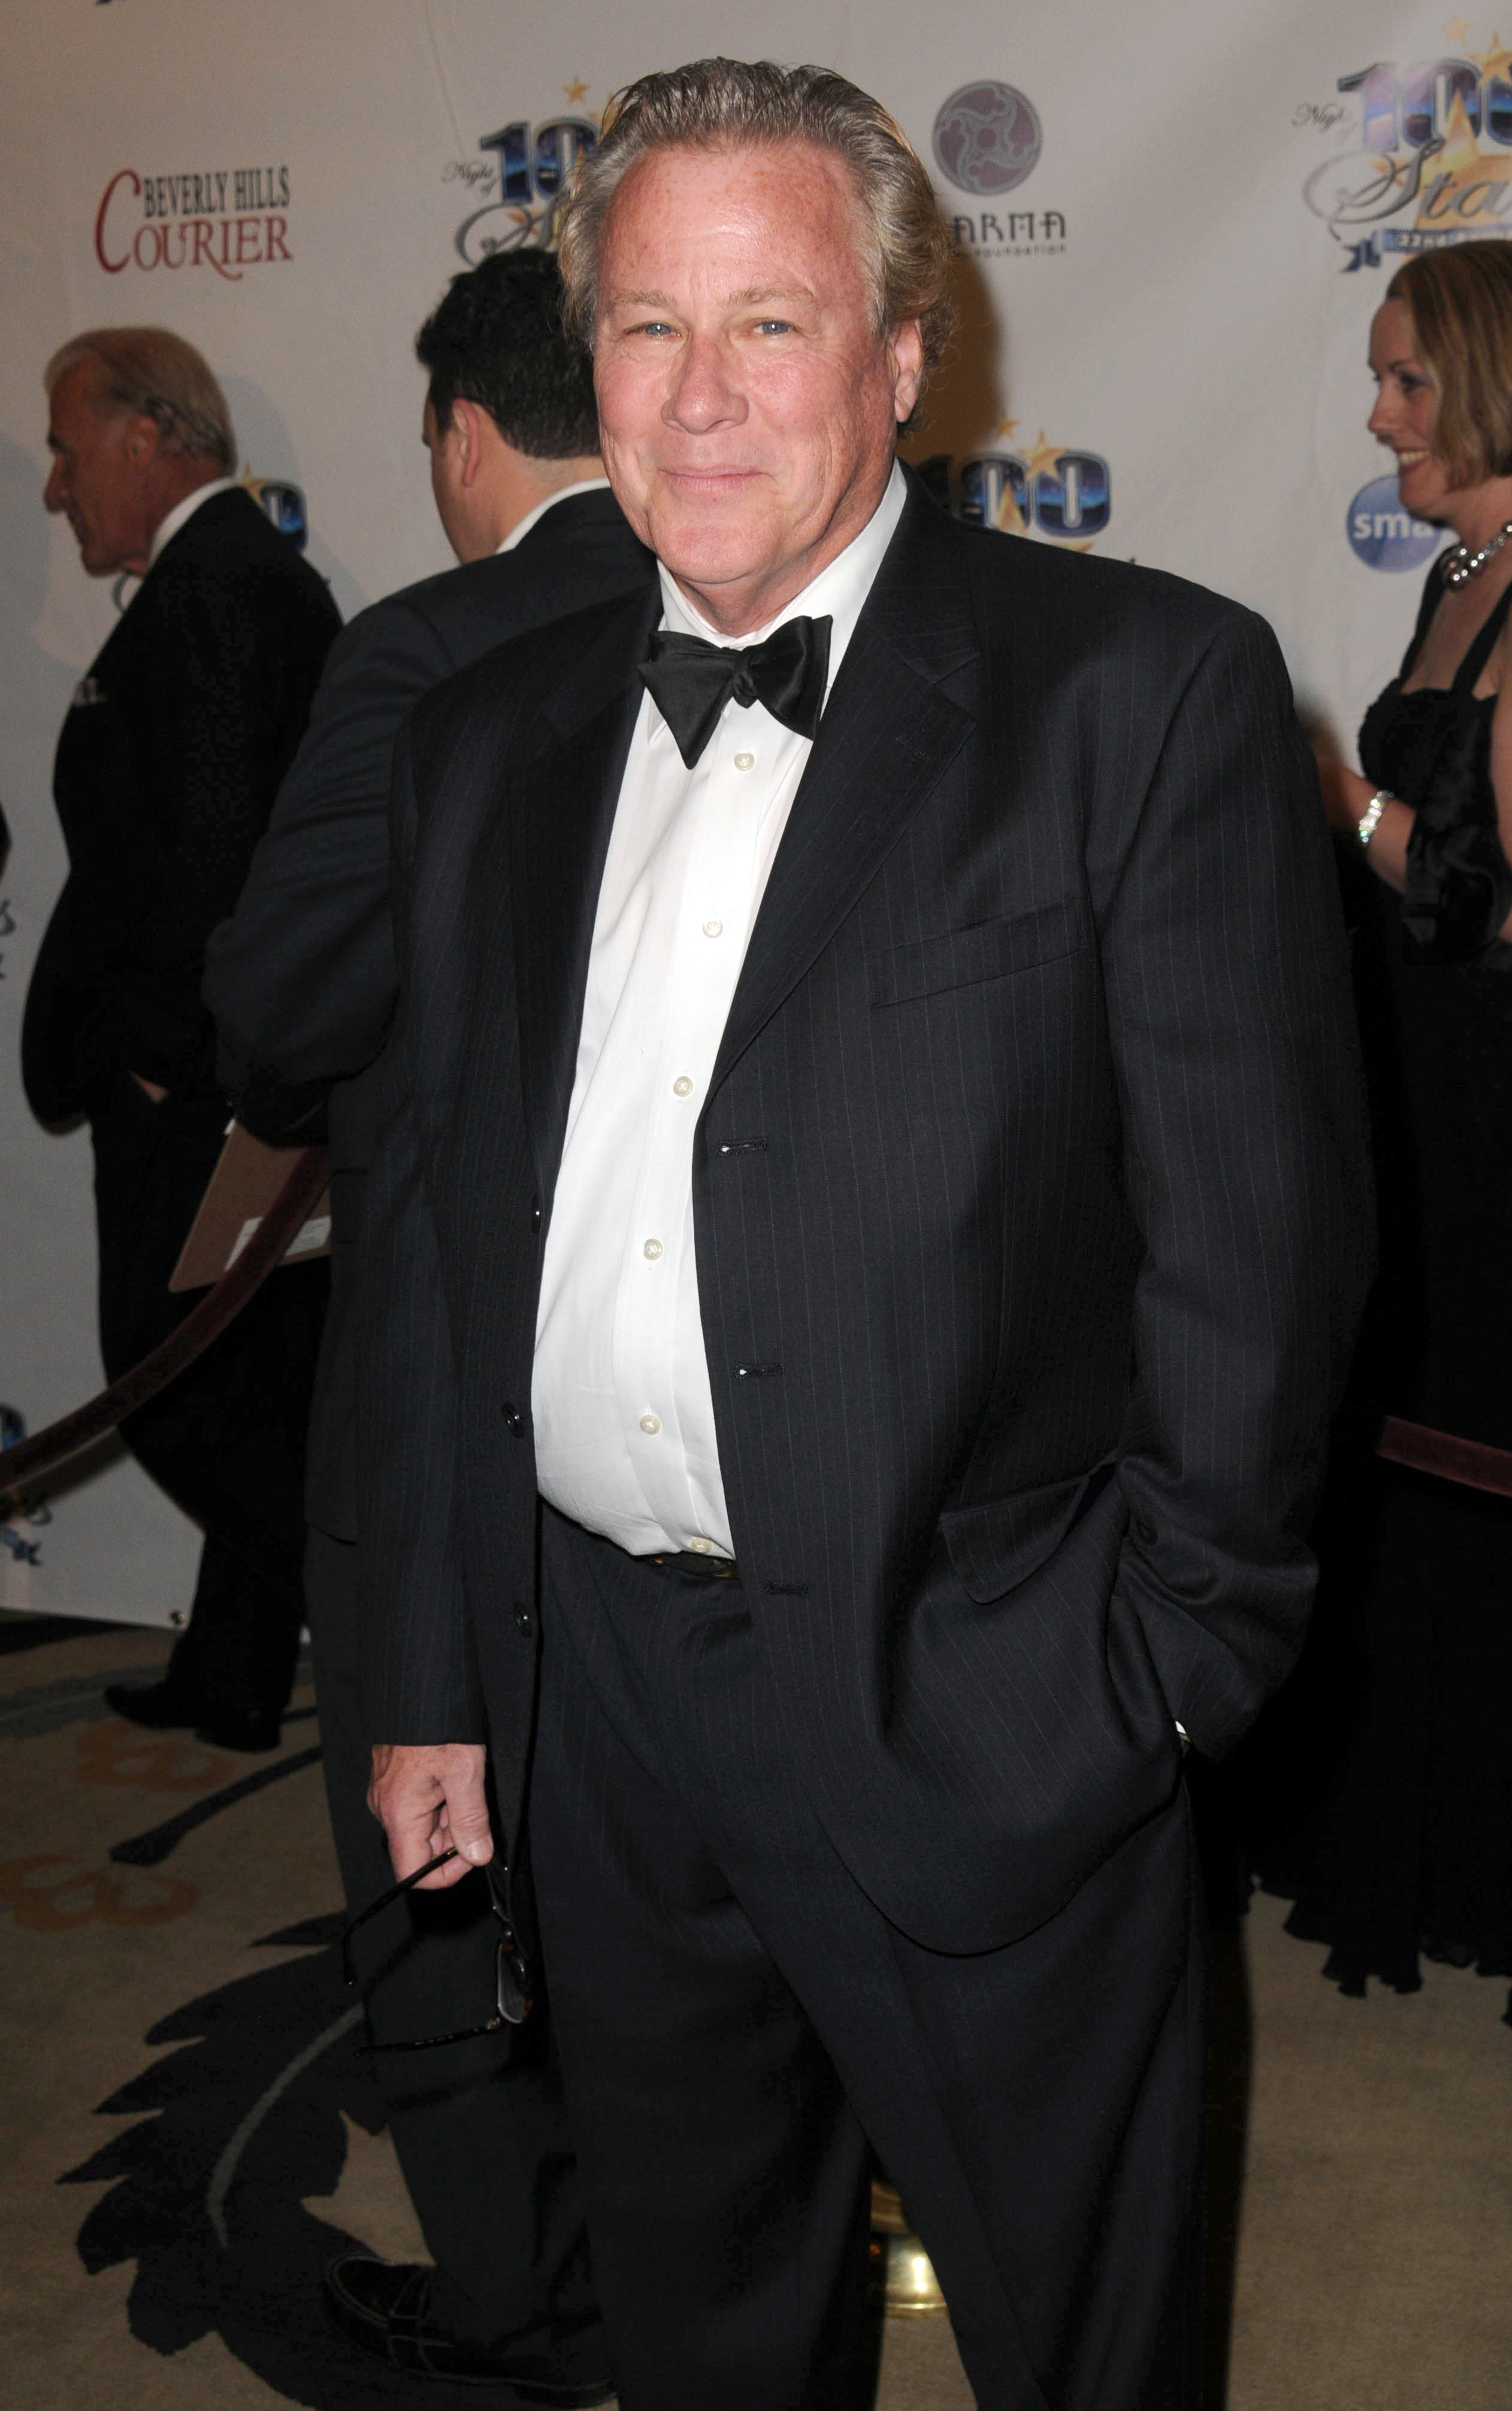 John Heard at the 22nd Annual Night of 100 Stars Oscar Viewing Gala in Beverly Hills, California on February 26, 2012 | Source: Getty Images